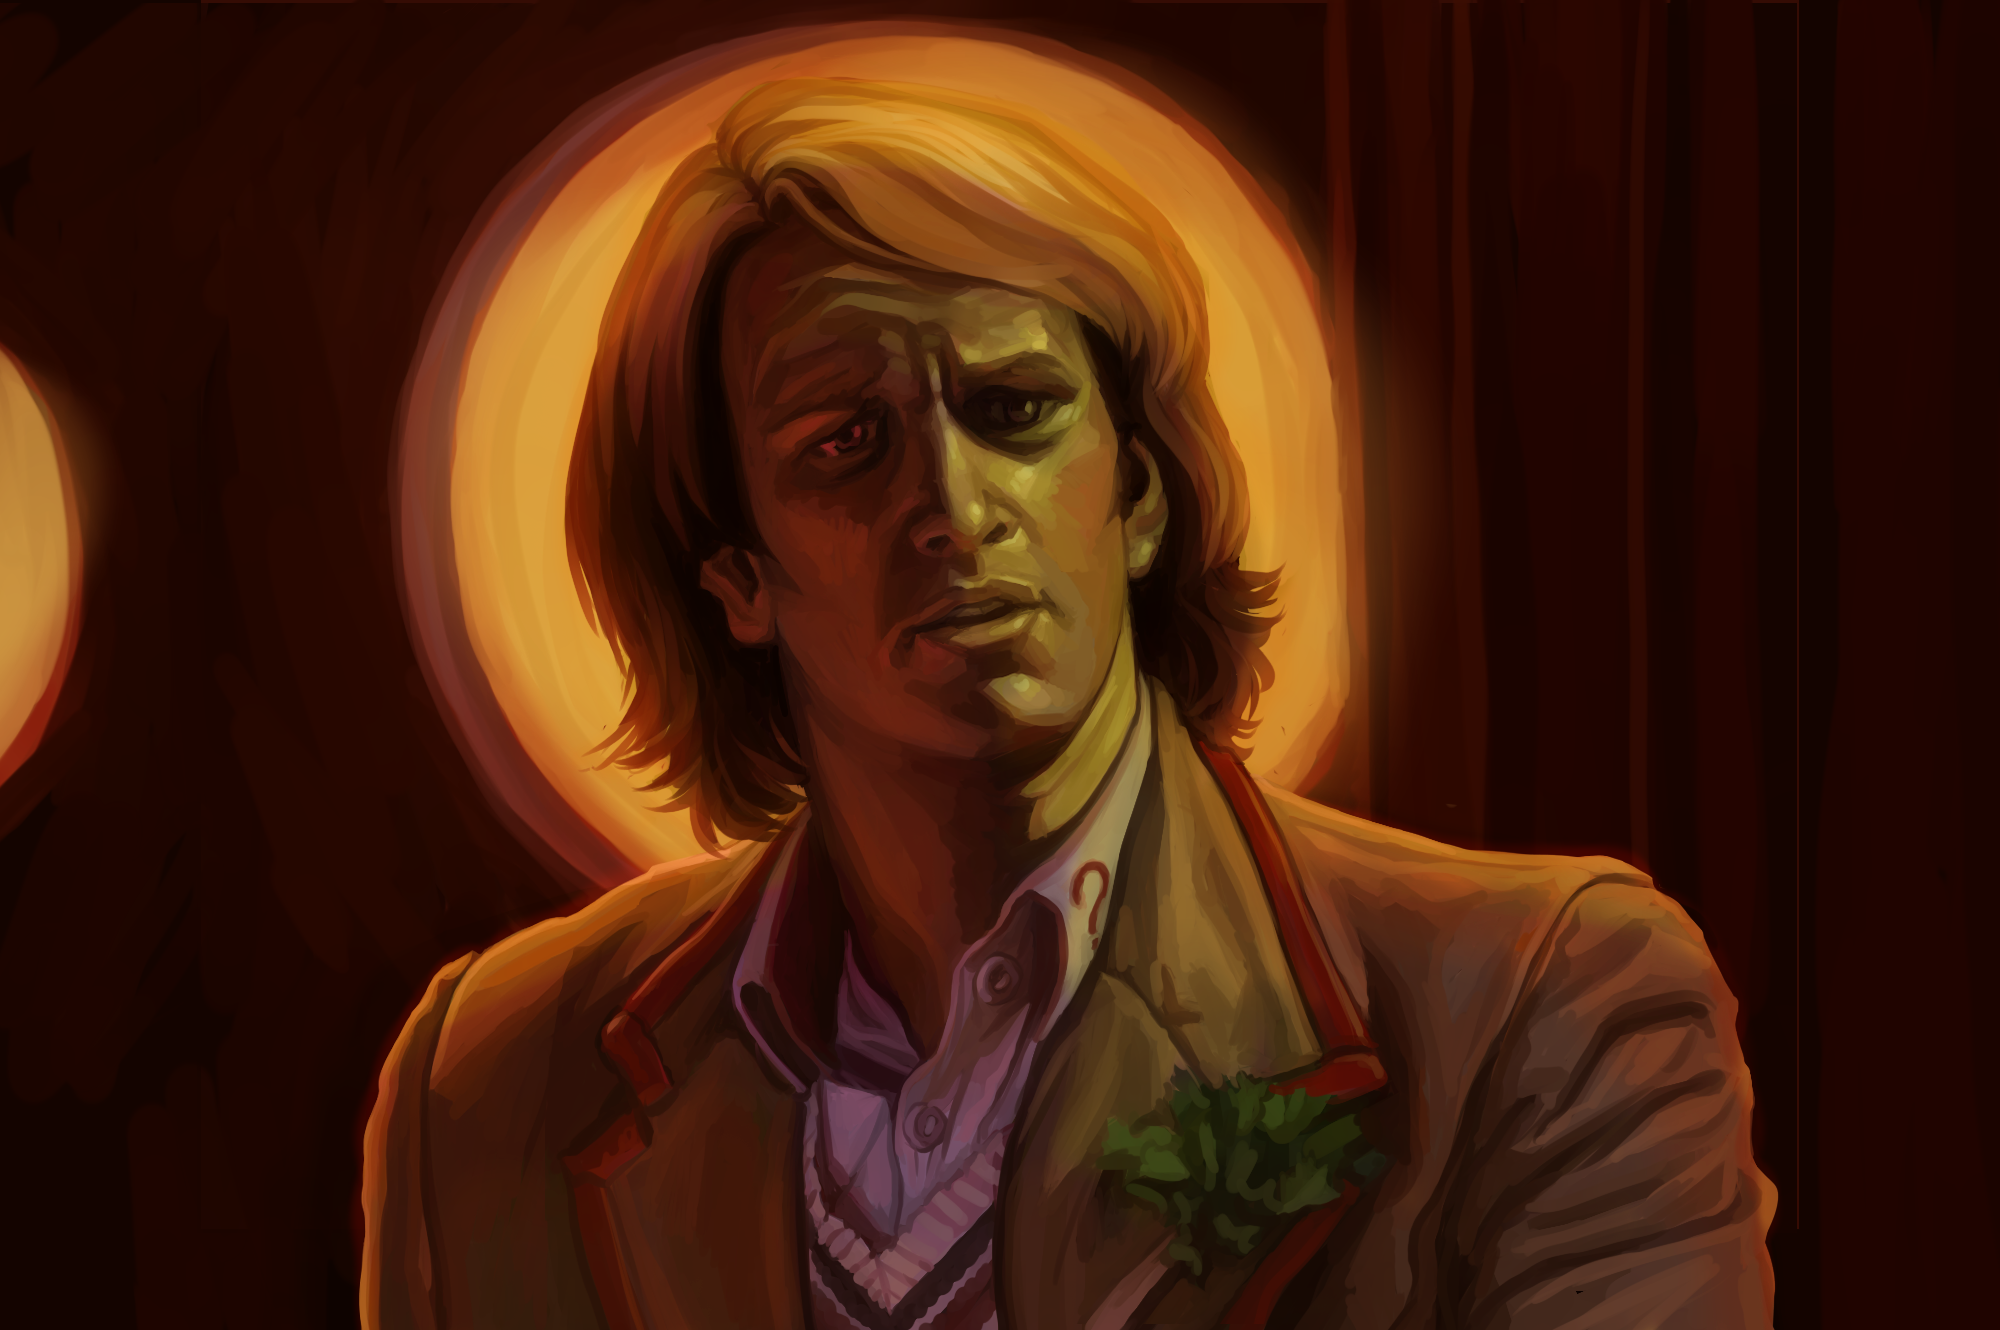 Digital painting of the fifth doctor from Doctor Who. In this painting his skin is lit up green. He has shaggy blonde straight hair nearly down to his shoulders, a bemused expression, and an outfit consisting of a beige frock coat with a sprig of cellery pinned to the lapel, a white collared shirt with a red question mark on the collar, and a cricketing sweater underneath. He is lit from behind by the glow of a roundel in the tardis.